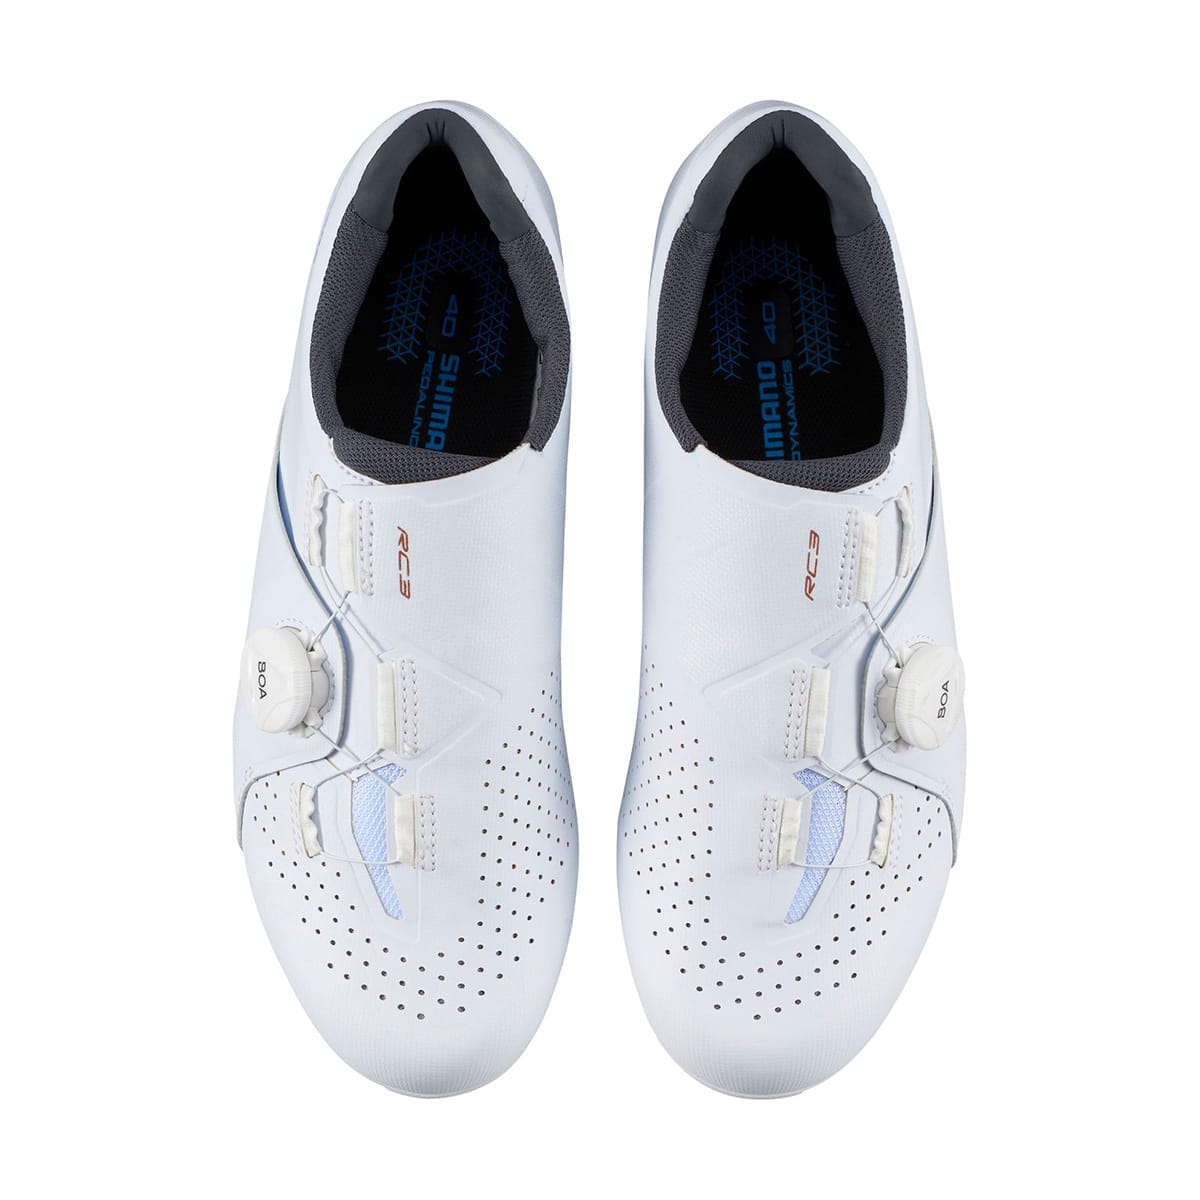 Chaussures Route SHIMANO RC300 Femme Blanc